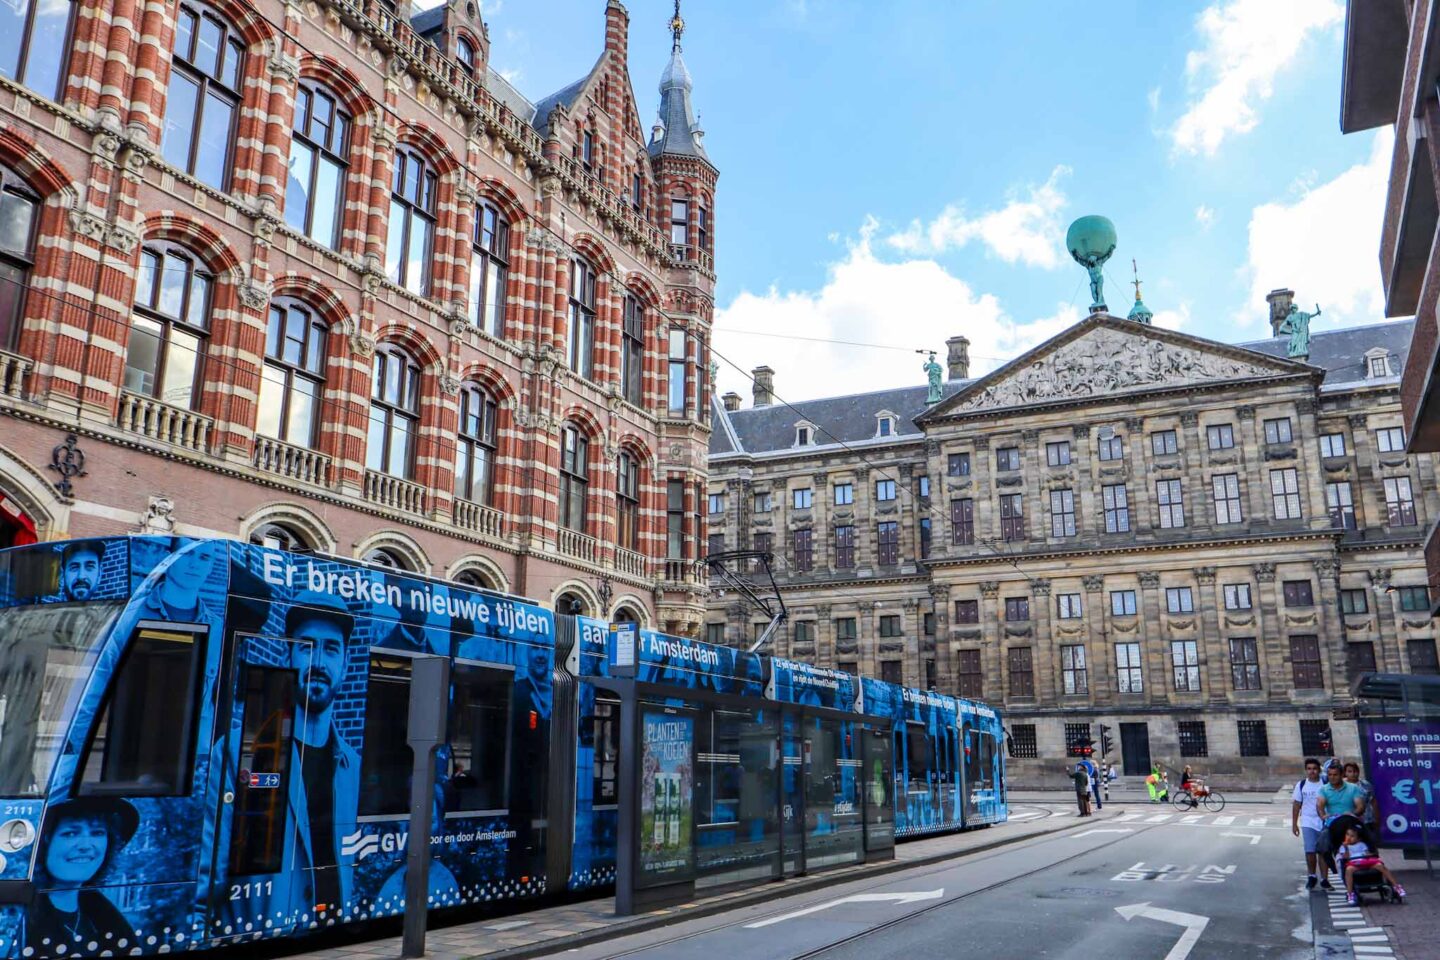 Amsterdam on a budget, tram in Amsterdam city, getting around Amsterdam on a budget